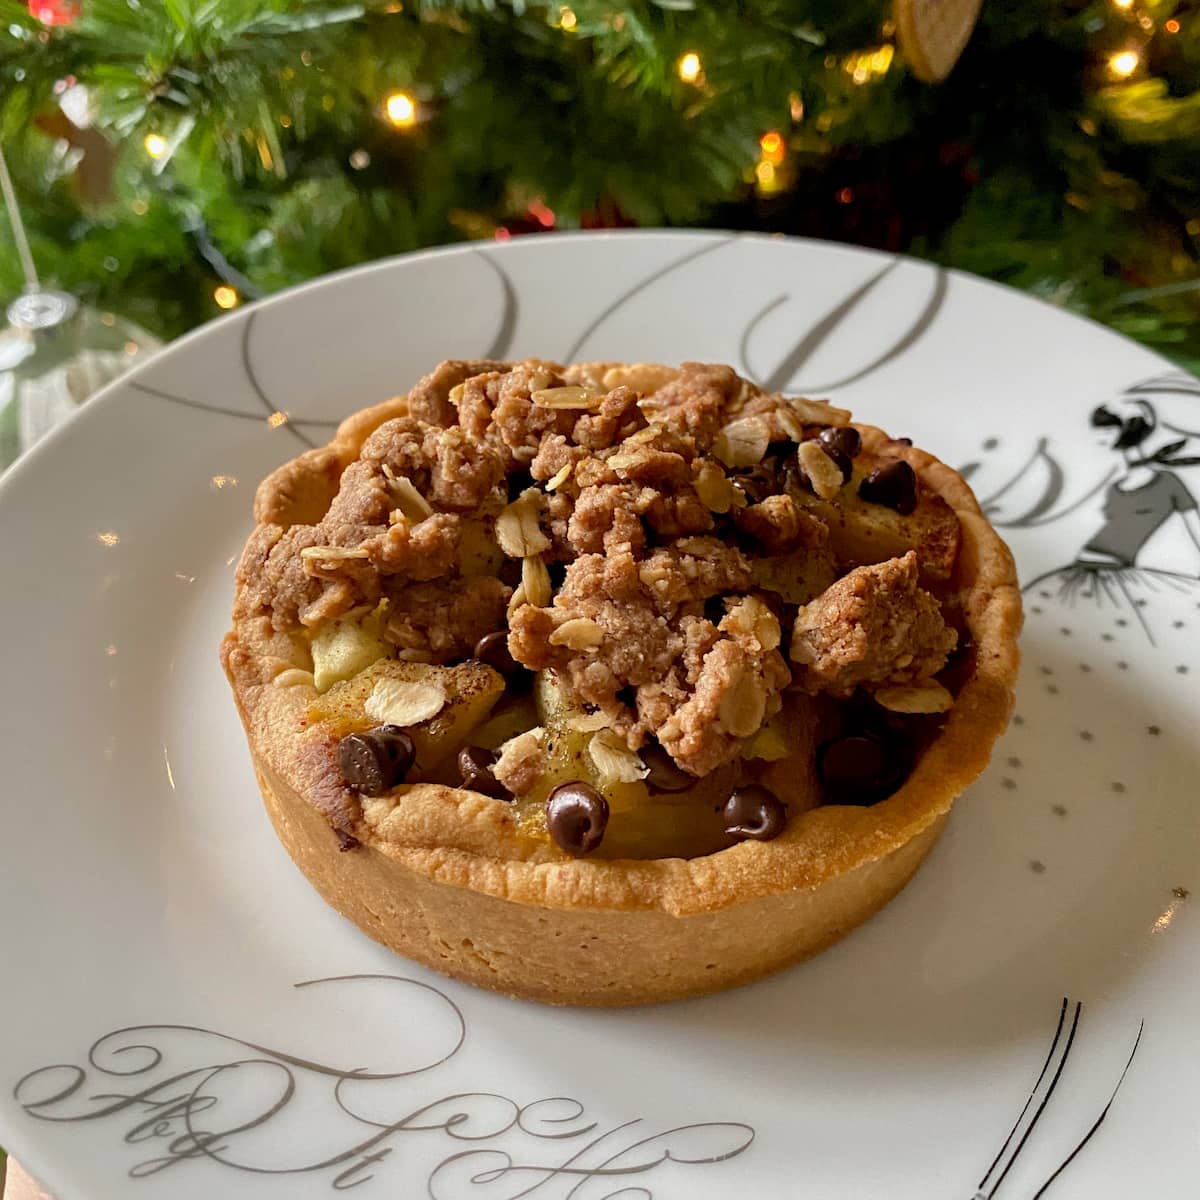 apple tartlet topped with chocolate crumble